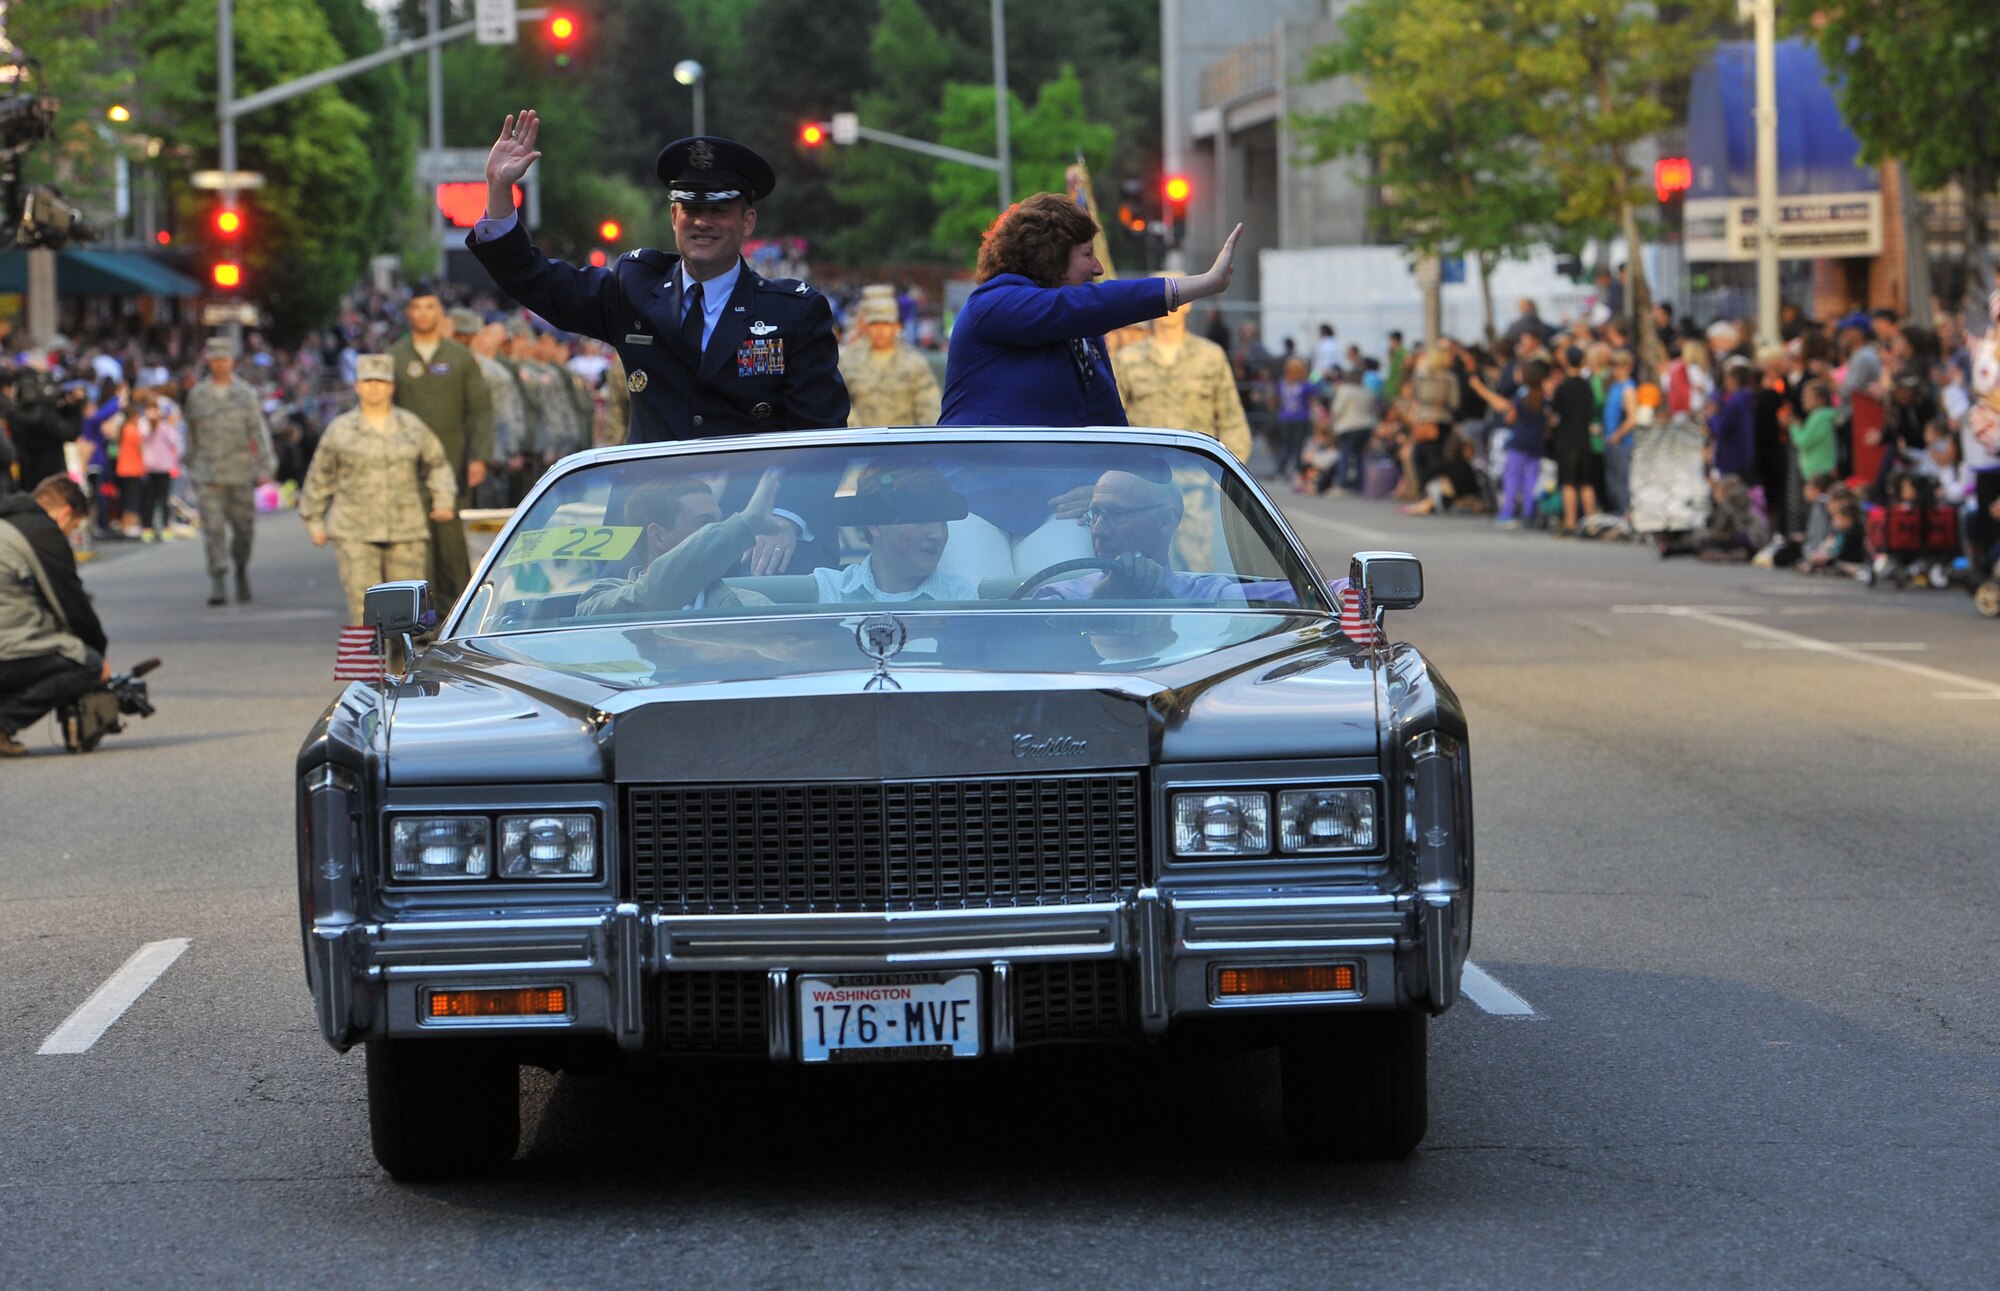 Col. Brian Newberry and his wife, Jill, represent Team Fairchild during the Lilac Festival 2014 Armed Forced Torchlight Parade in Spokane Wash., May 17, 2014. The 75-year-old tradition is made to honor service members of both the past and present. Newberry is the 92nd Air Refueling Wing commander. (U.S. Air Force photo by Staff Sgt. Veronica Montes/Released) 